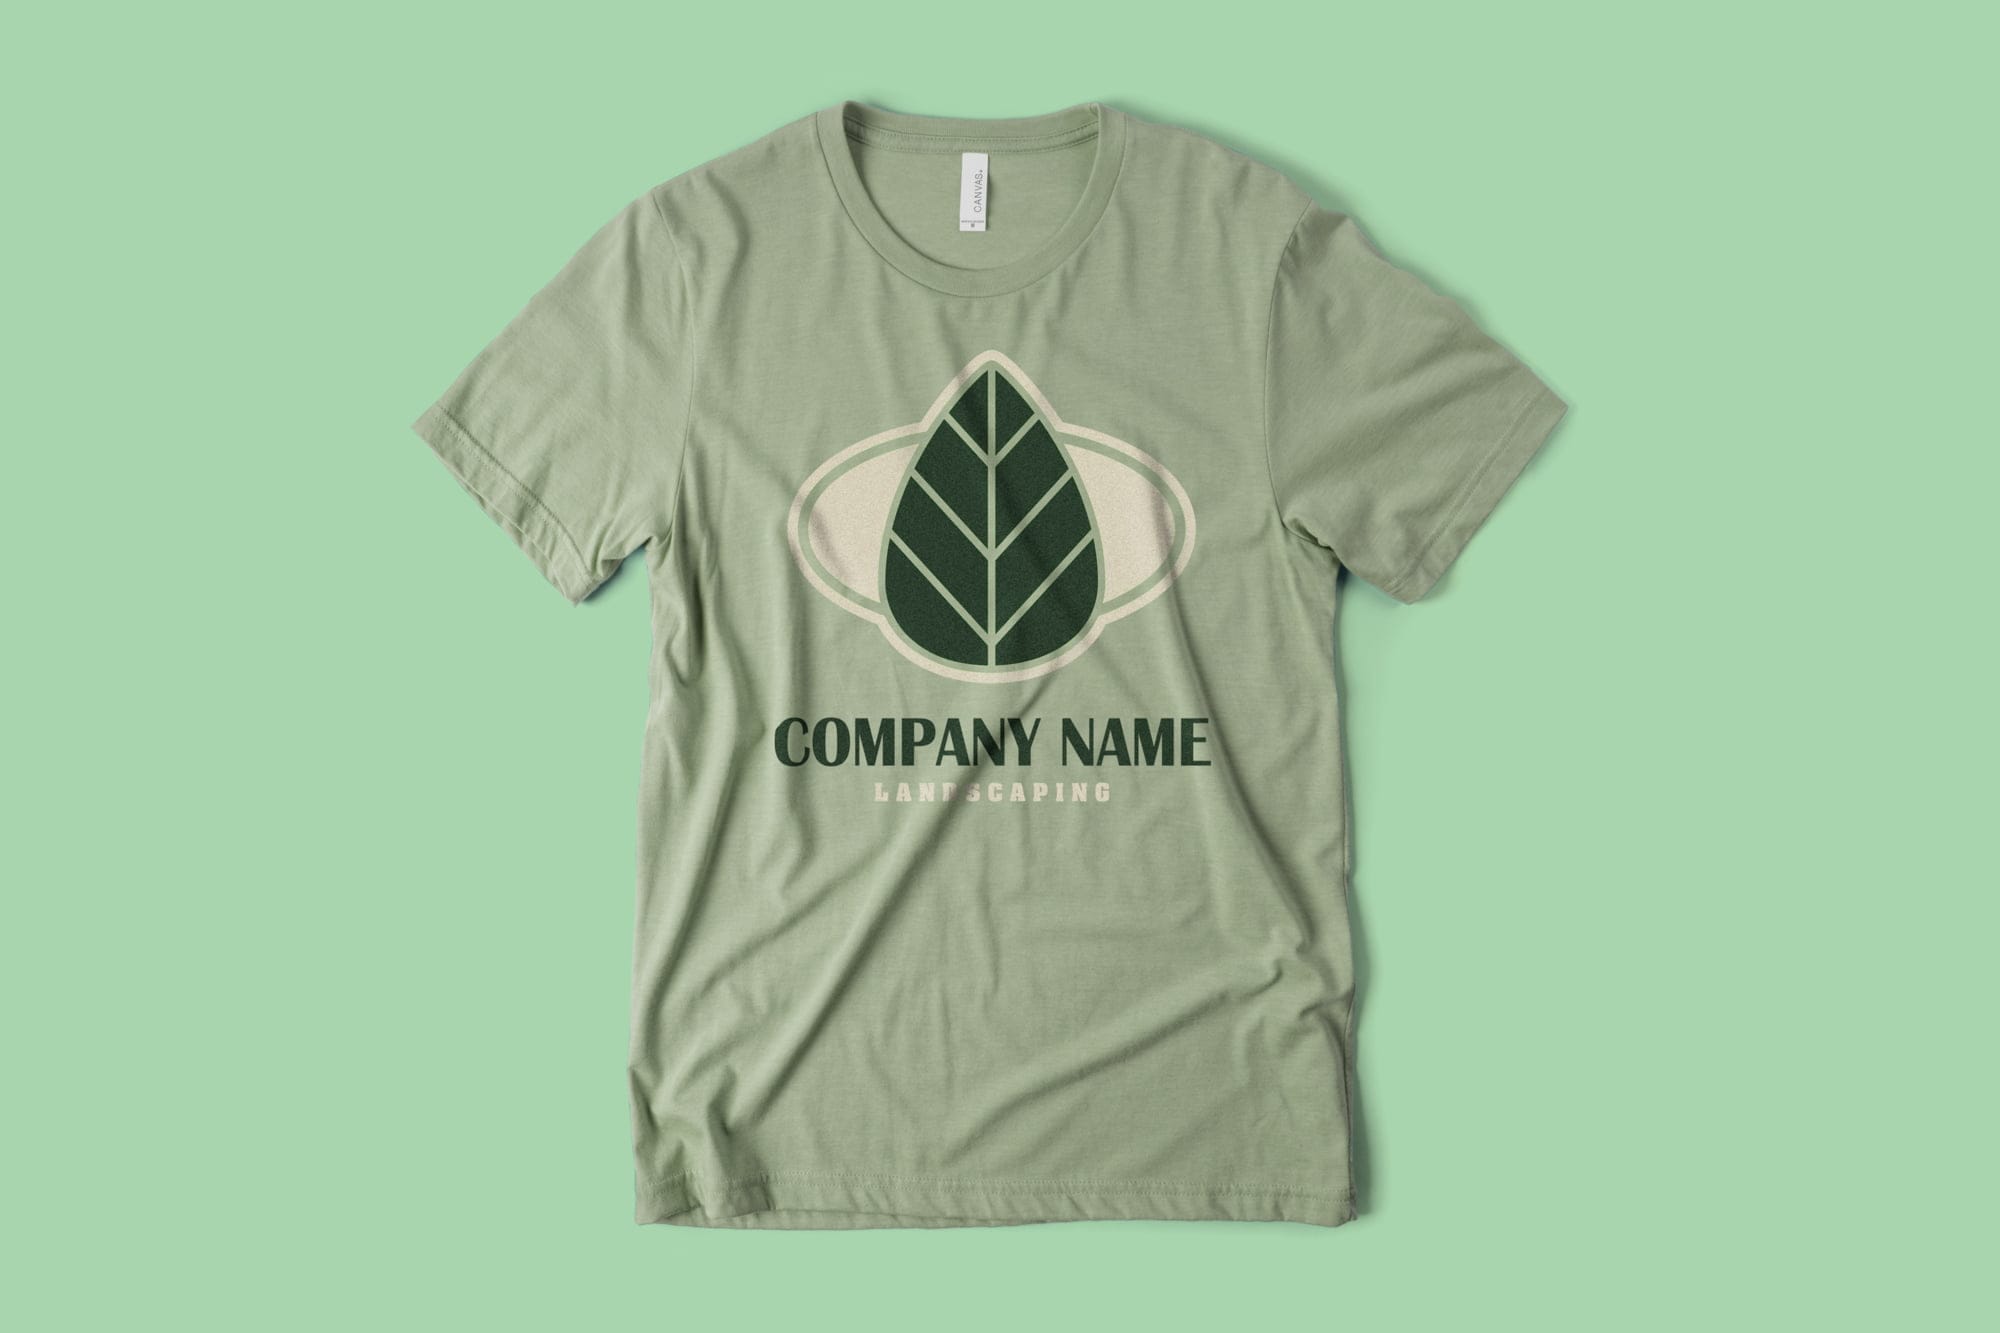 A shirt showing an example of a simple, yet eye-catching landscaping design.